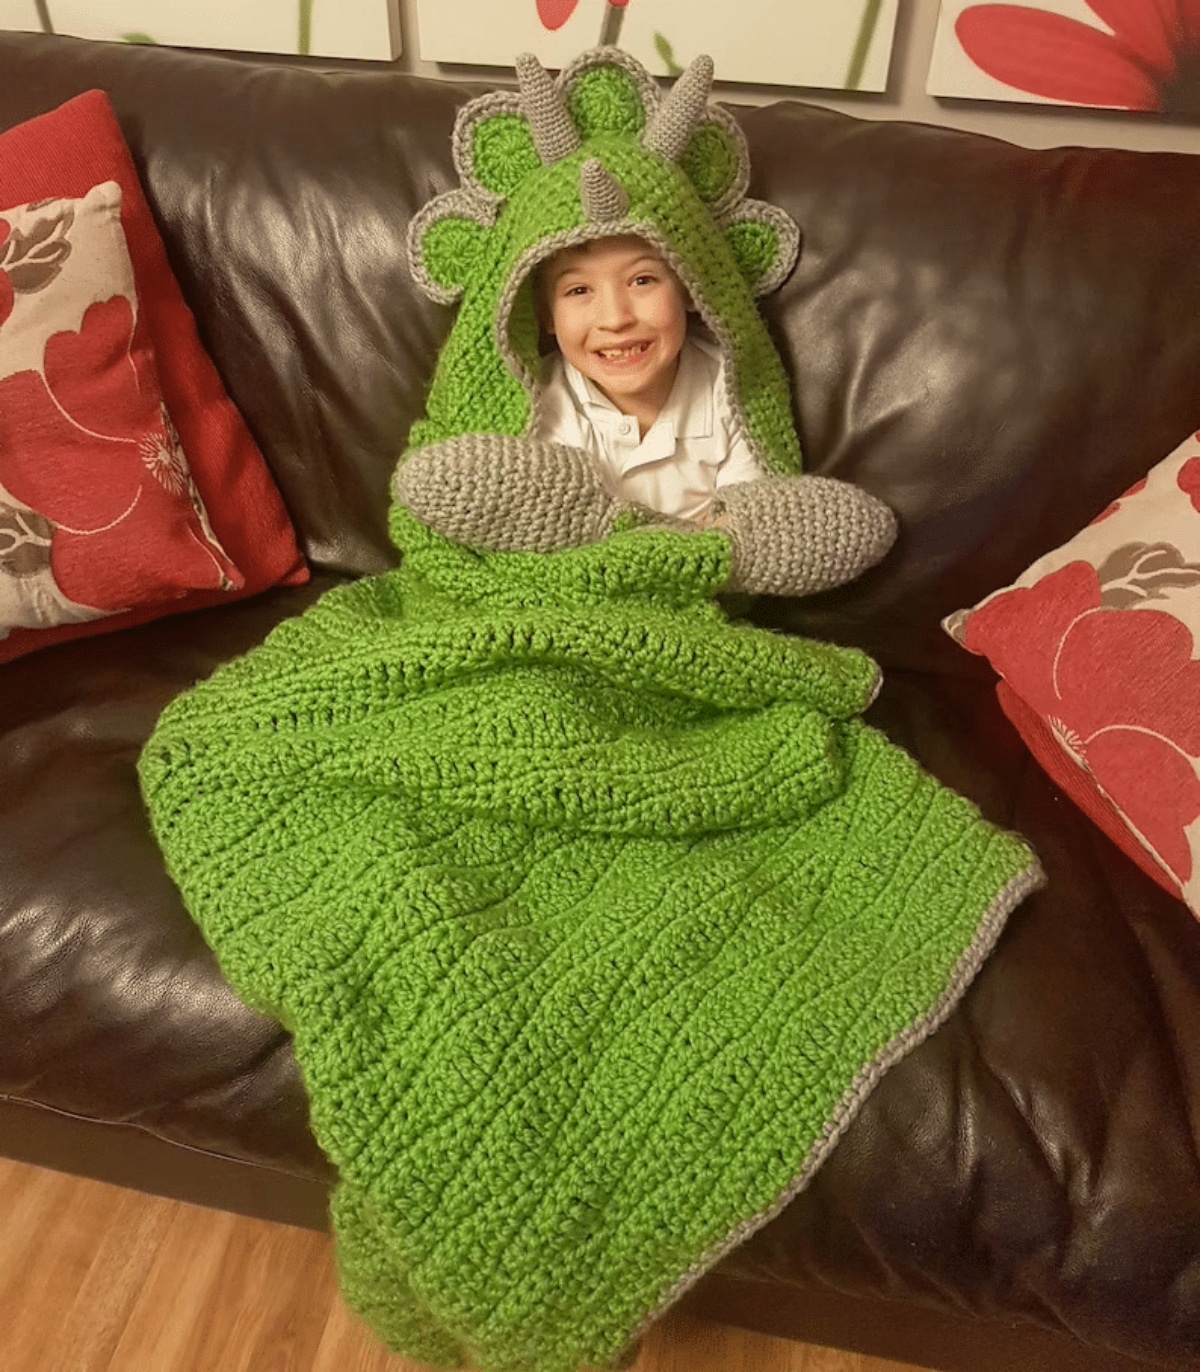 Young boy sitting inside a green crochet hooded blanket with gray horns and a frill behind the horns.